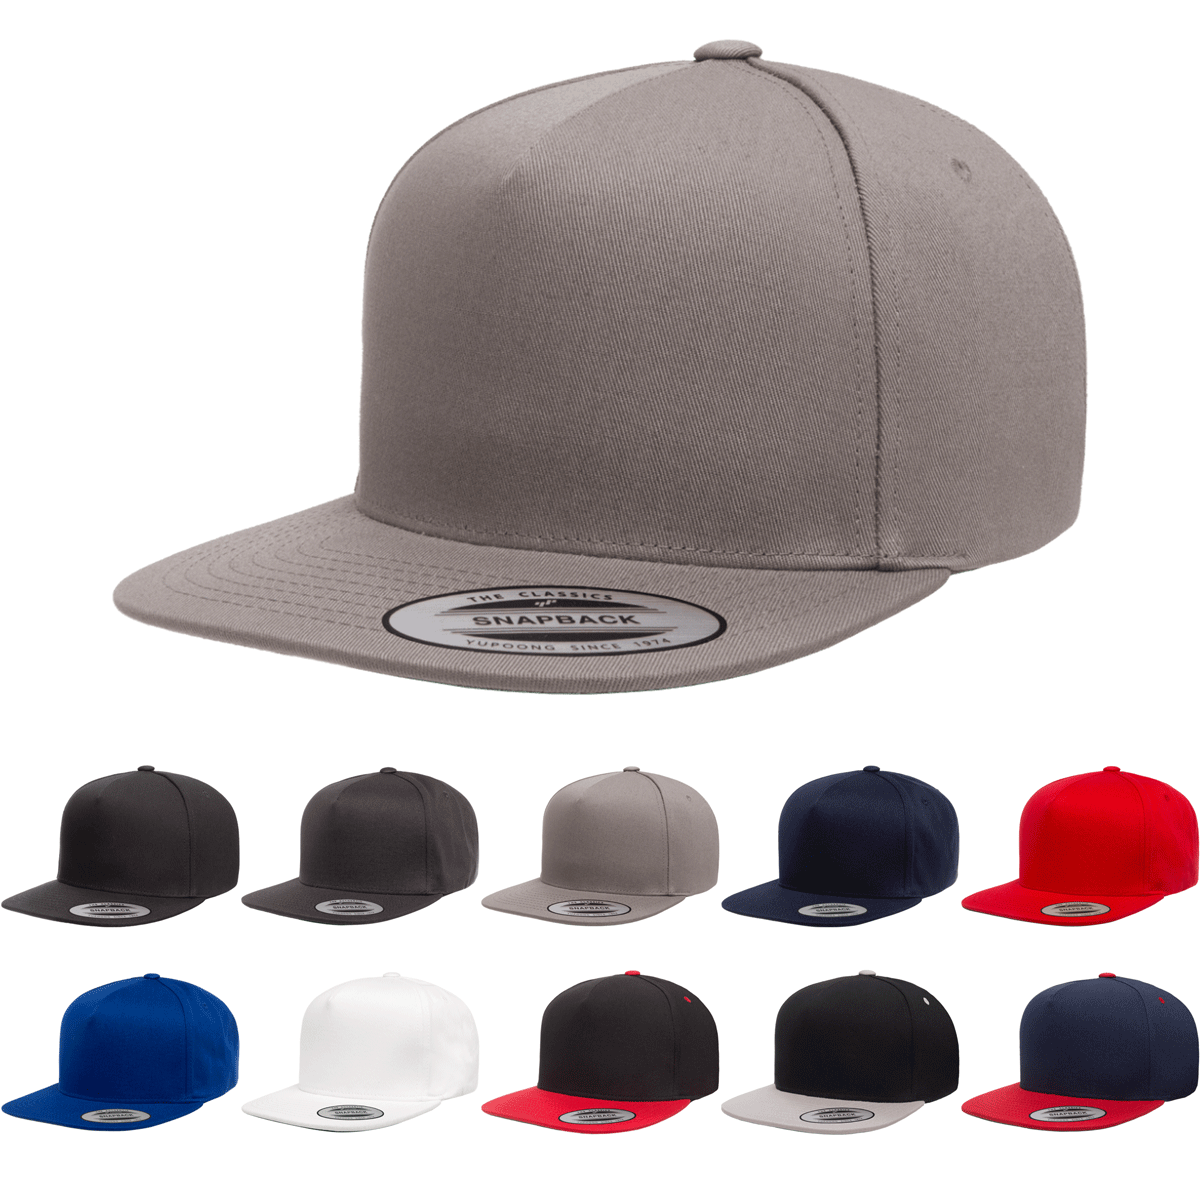 YP Classics®, Yupoong 6007 - Wholesale The 5-Panel Cotton Snaback Park – Twill Cap